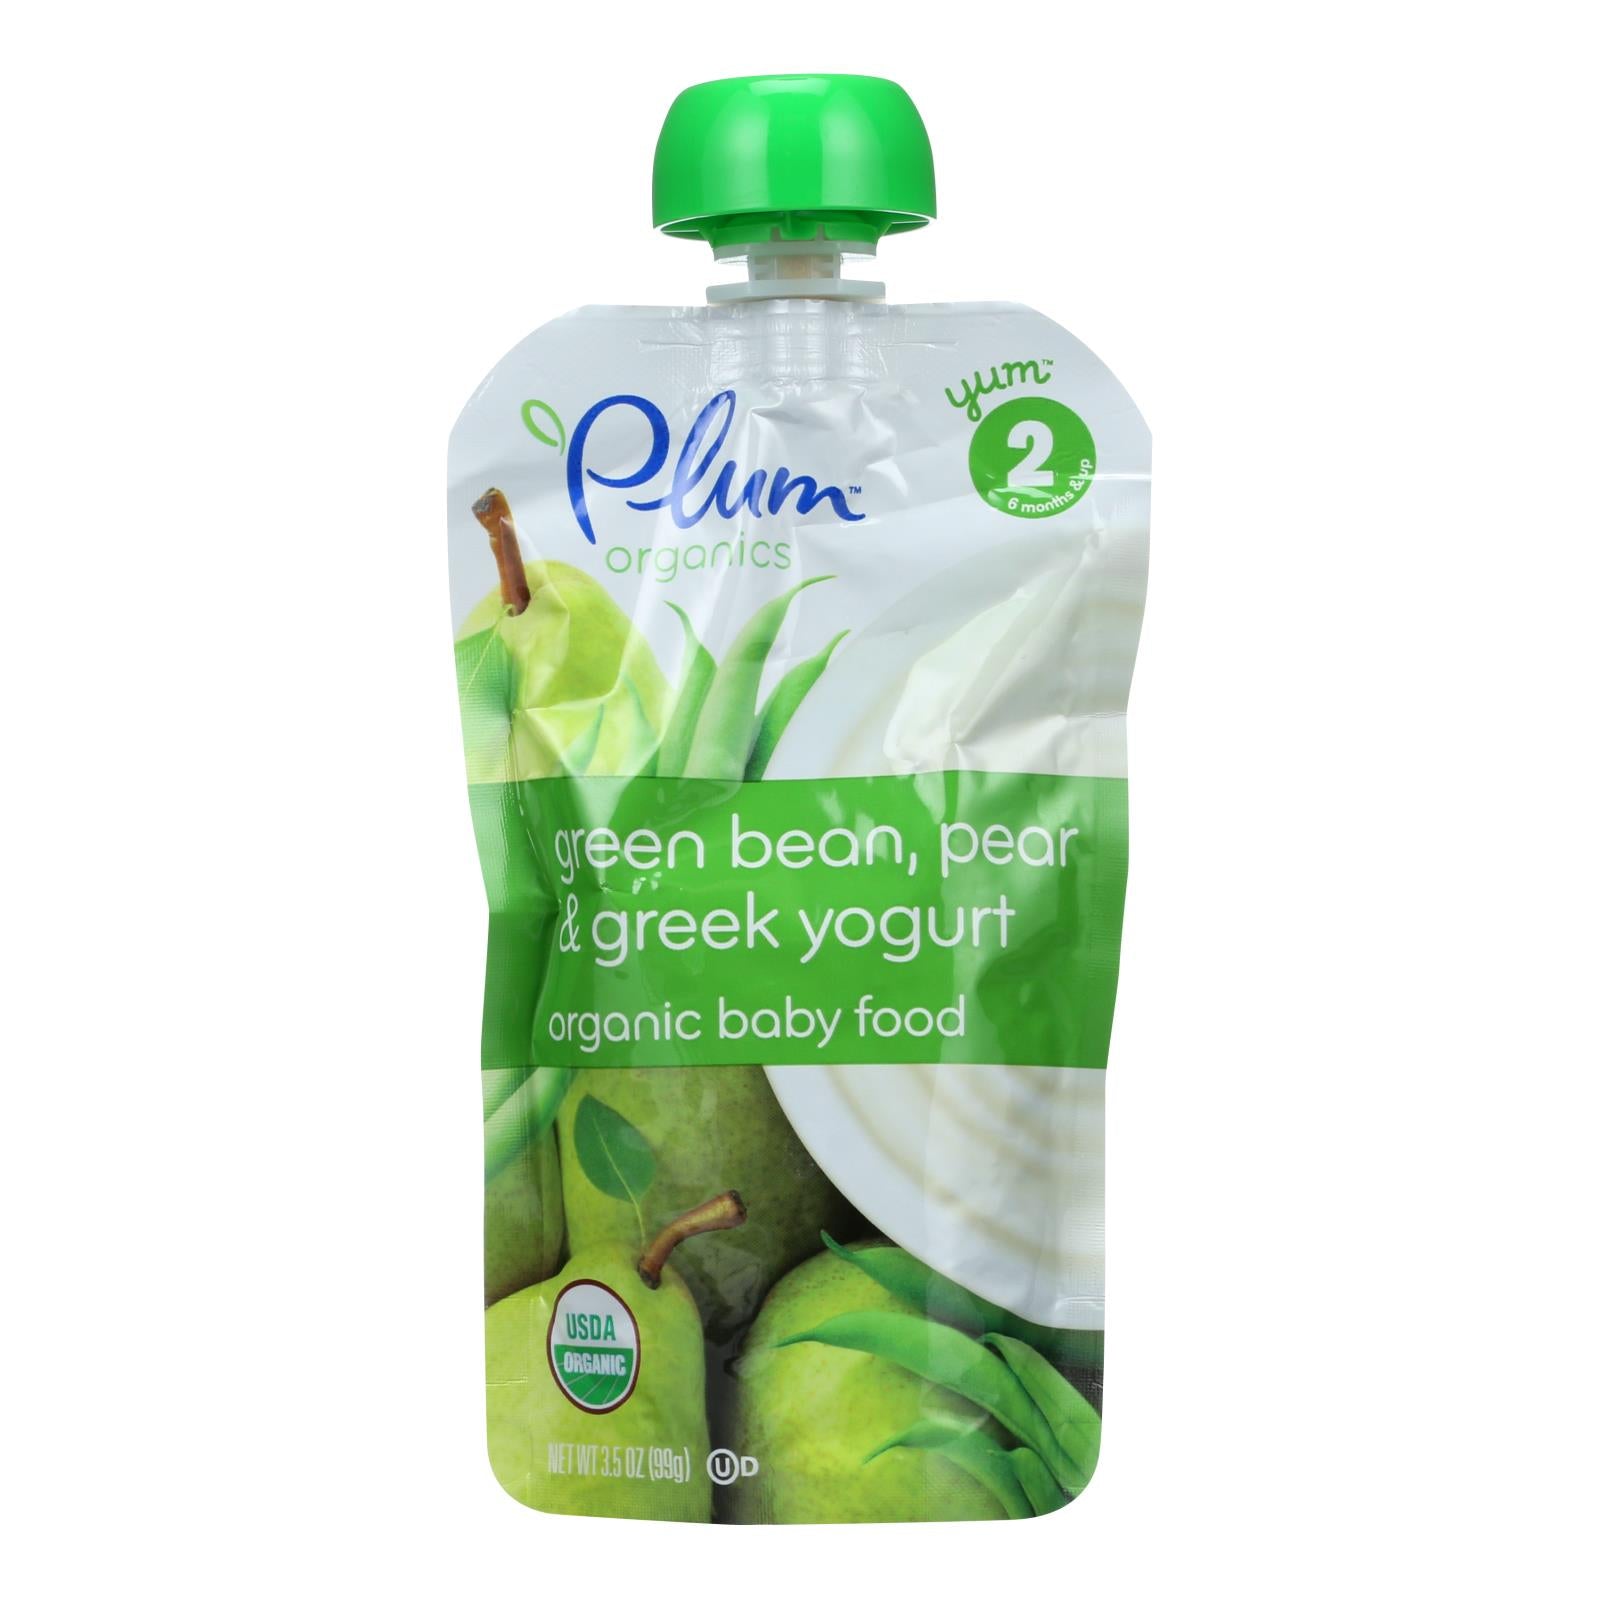 Plum Organics Baby Food - Organic - Green Bean Pear And Greek Yogurt - Stage 2 - 6 Months And Up - 3.5 .oz - Case Of 6 - Whole Green Foods